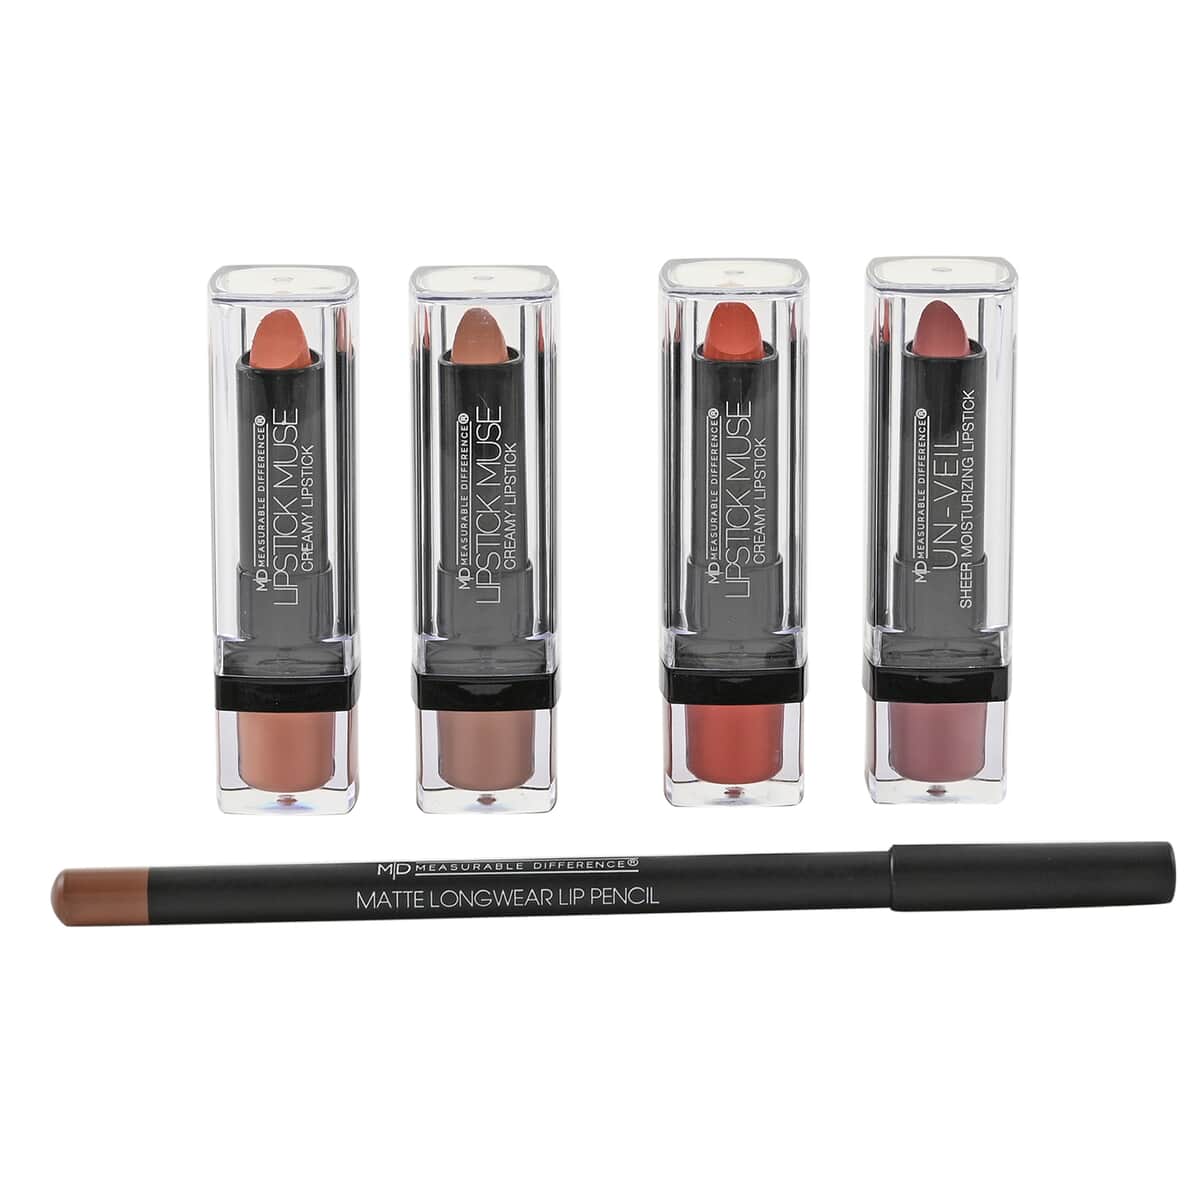 MEASURABLE DIFFERENCE Set of 4 Nude Lipstick Muse Creamy and Lip Pencil image number 0